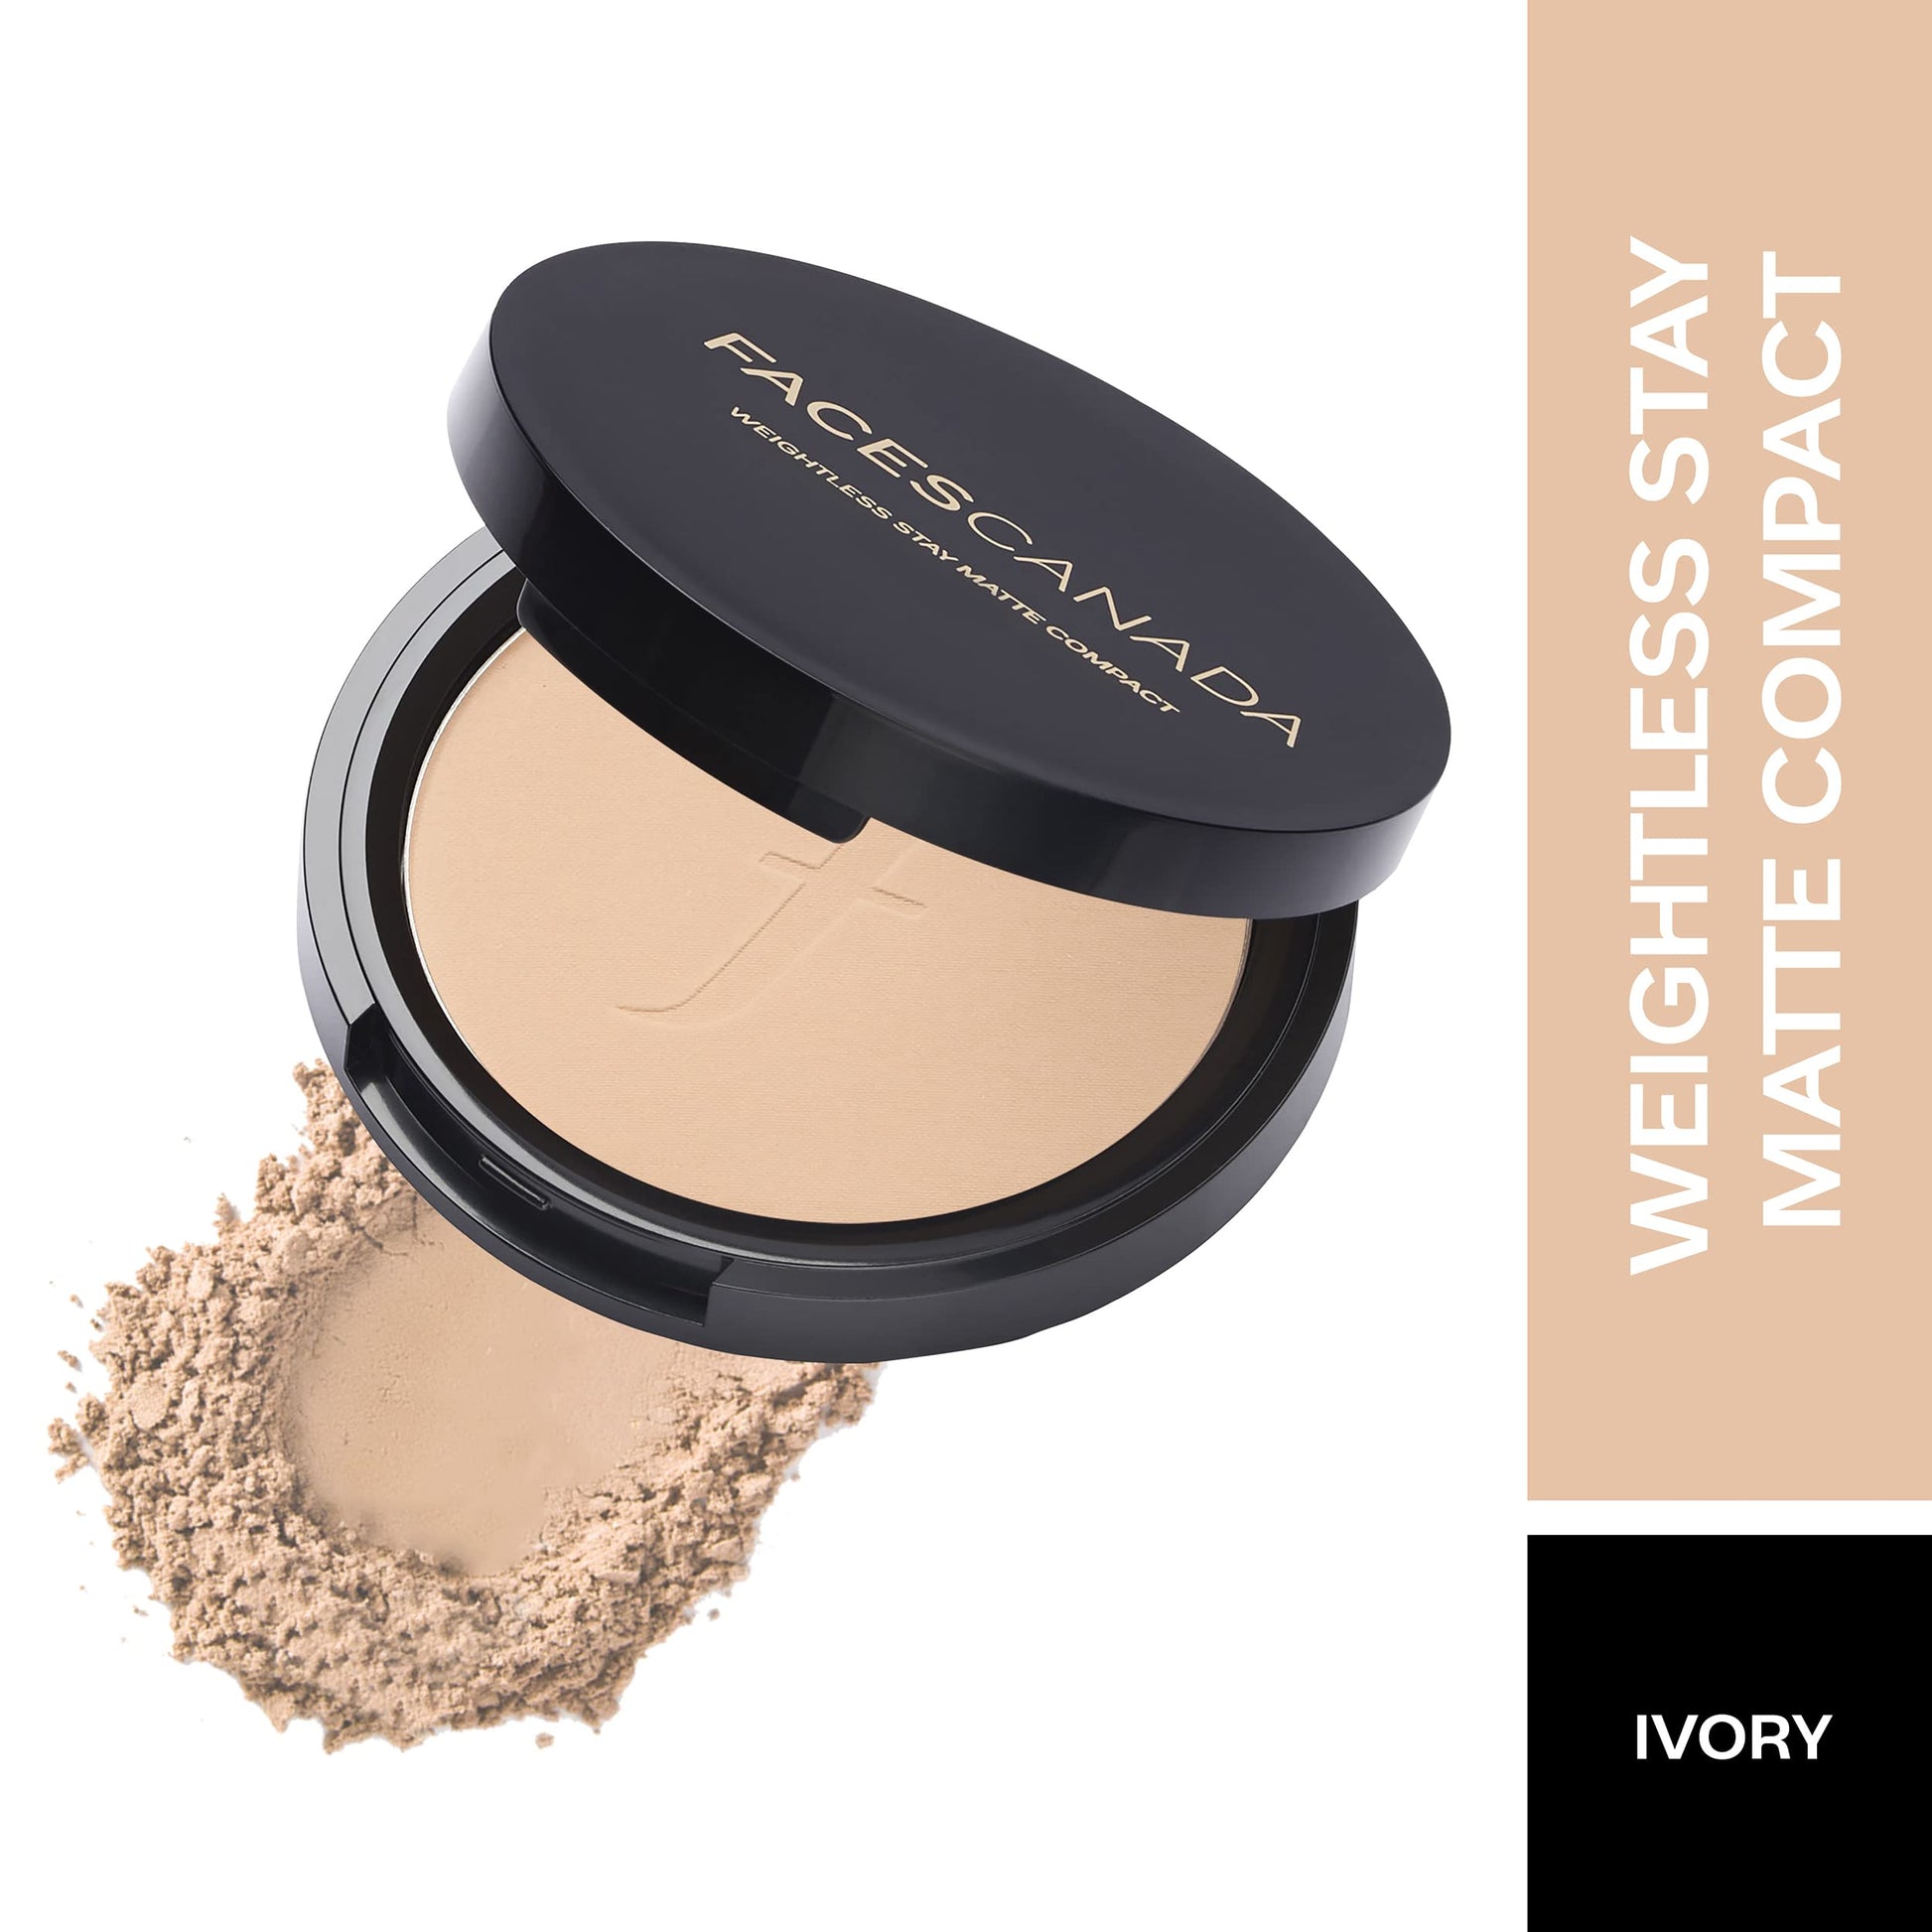 Faces Canada Weightless Matte Compact SPF 20, Ivory 9gm & Faces Canada Weightless Matte Compact SPF 20, Beige 9gm 